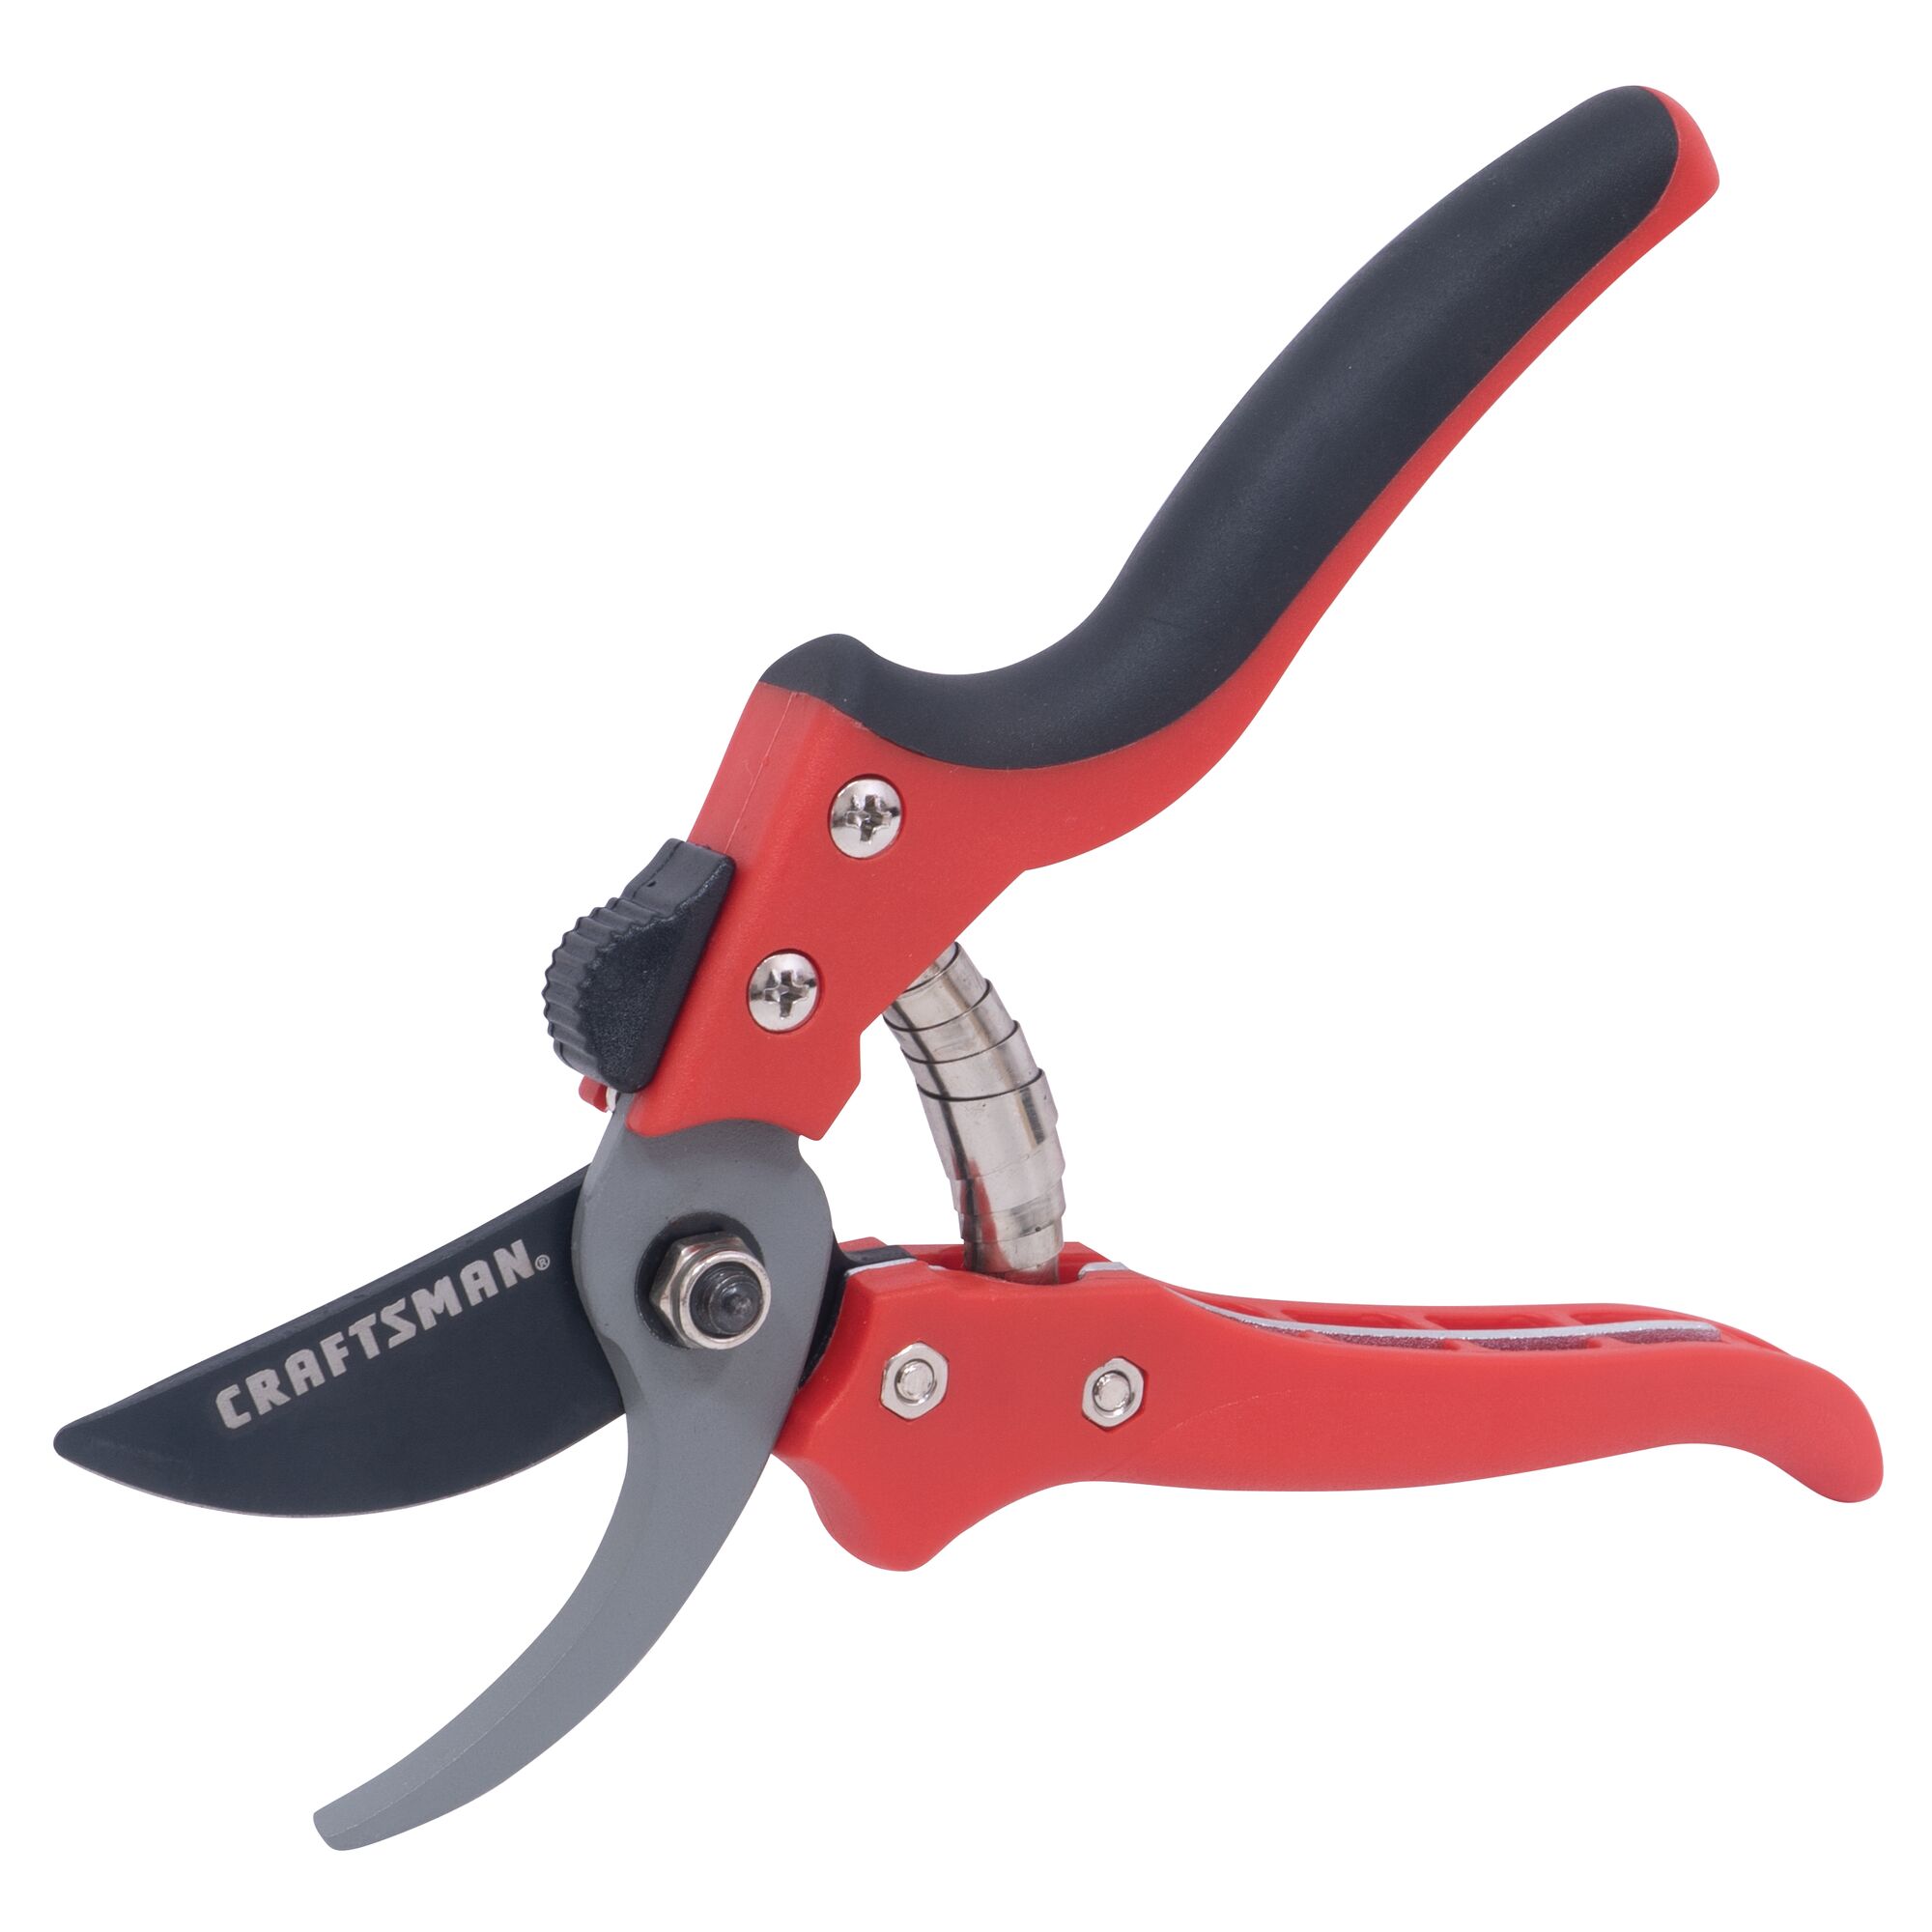 Right profile of 3 quarter inch cut bypass pruner.